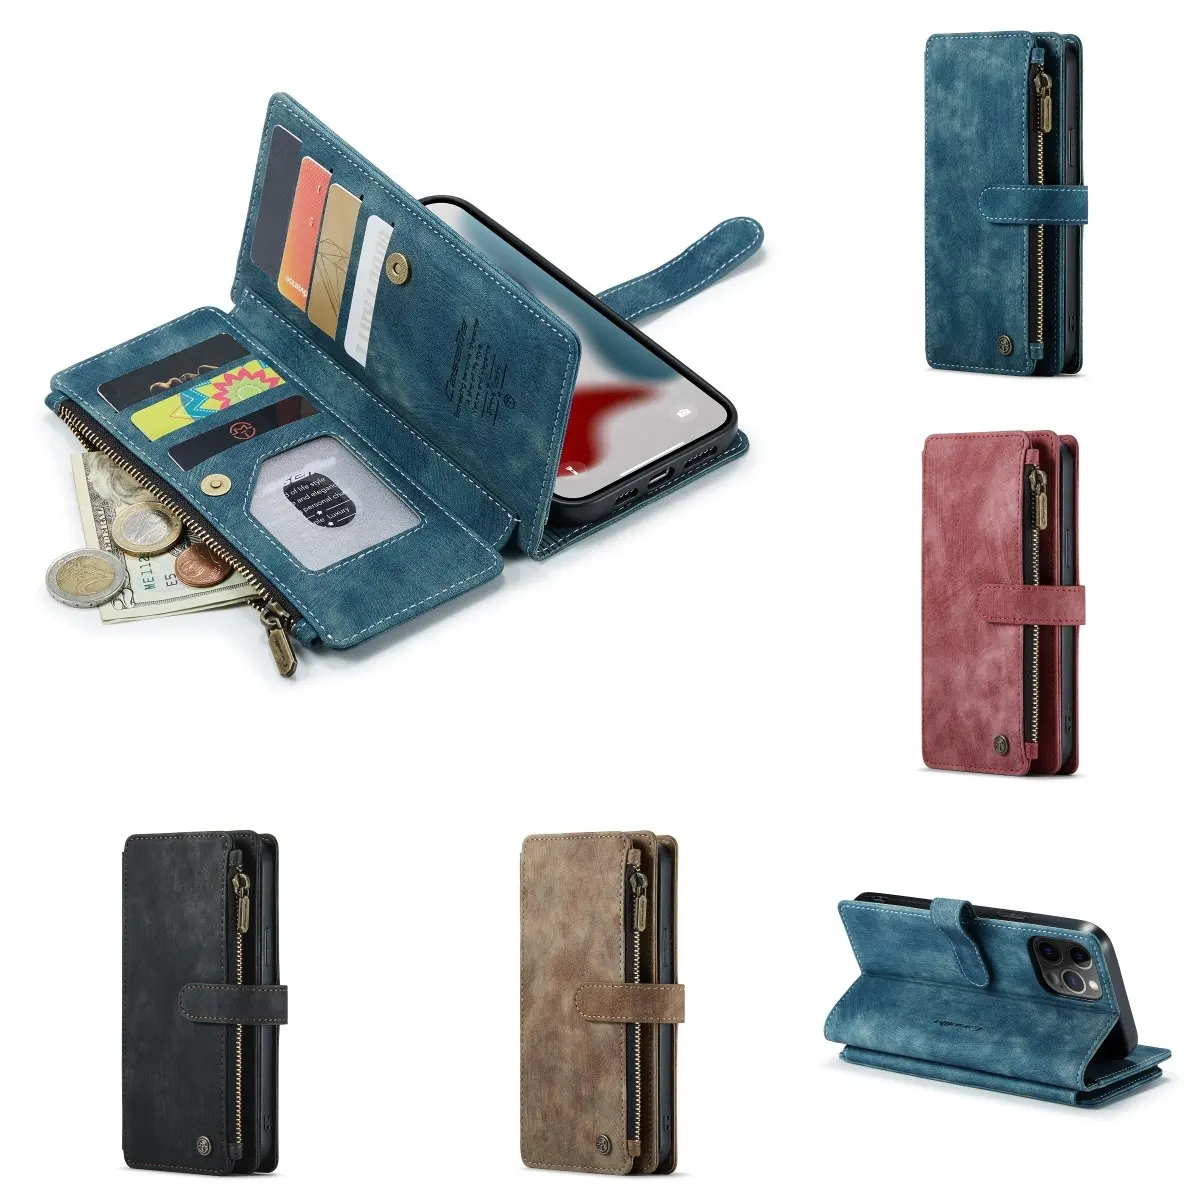 New Luxury CaseMe Phone Case Leather Wallet With Card Holder Leather Wallet Case For IPhone 7 8 X XR XS Max 11 12 13 Pro Max